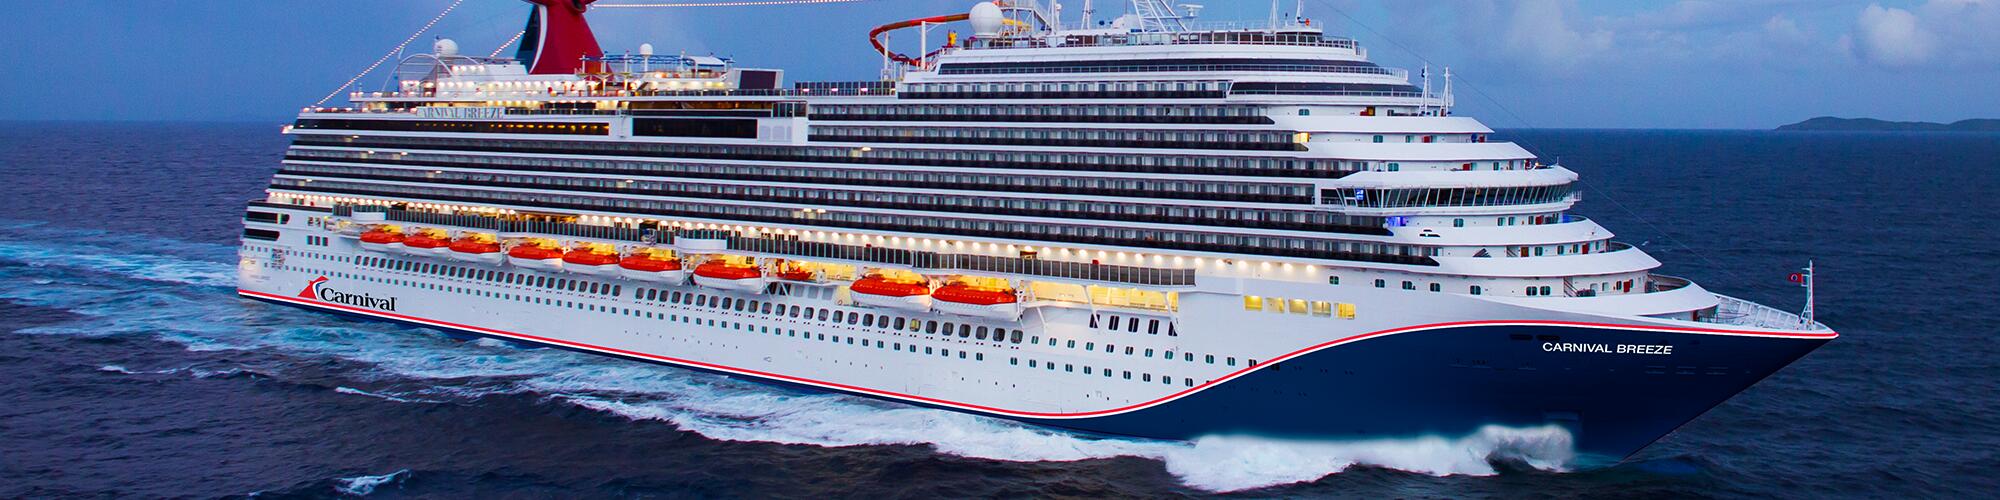 Upcoming Carnival Cruises 2023 Prices, Itineraries + Activities on Cruise Critic picture picture